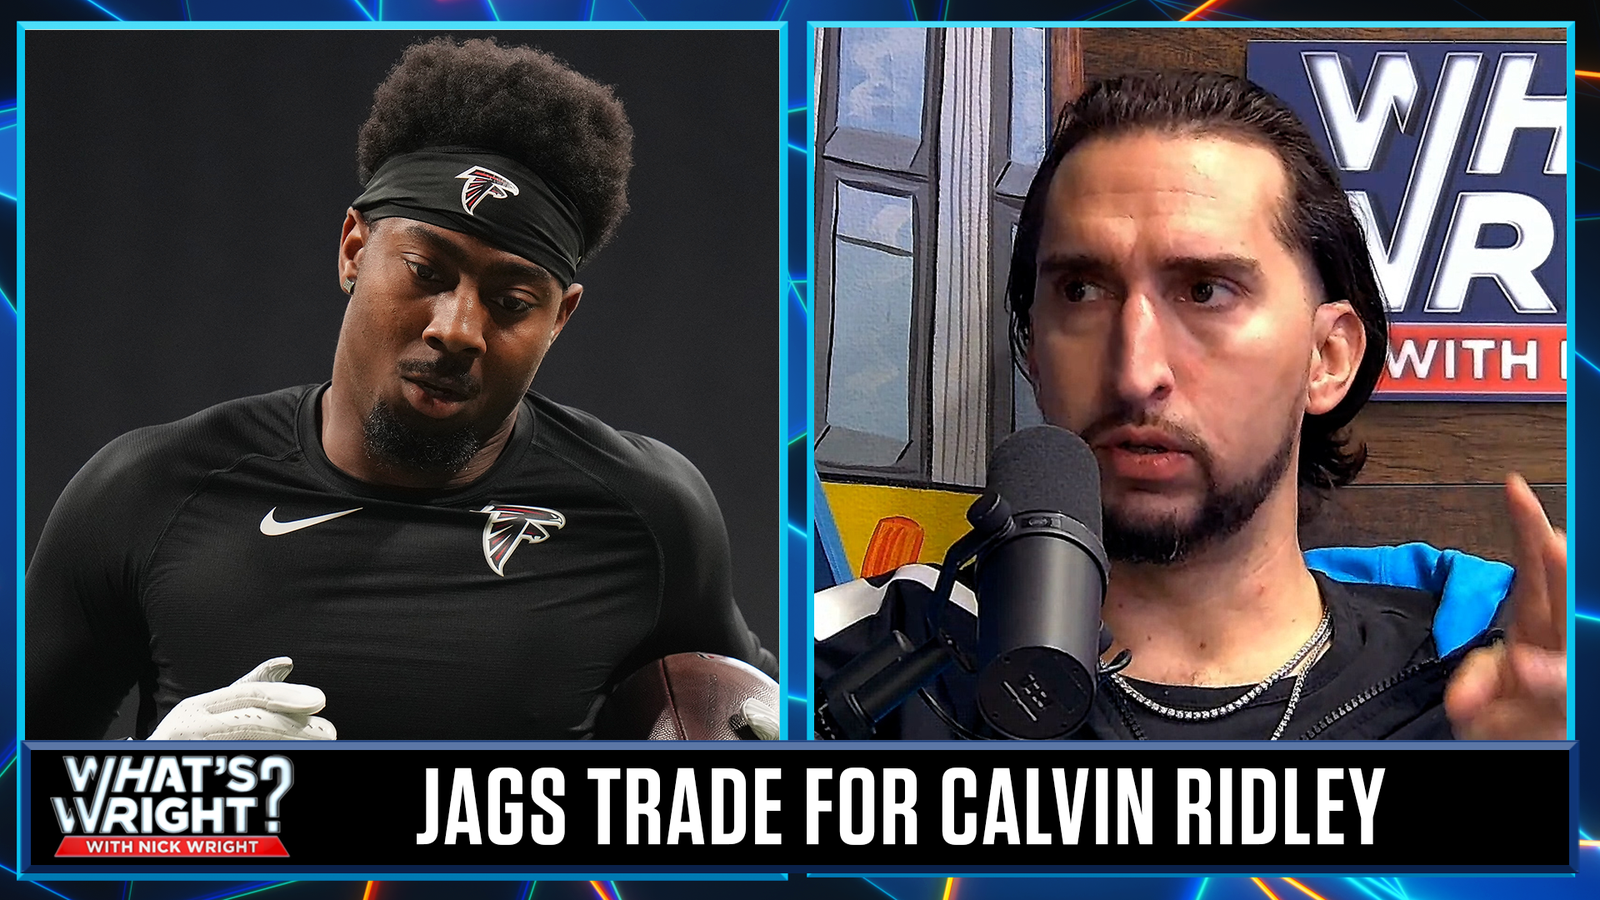 Nick reacts to Jaguars trade for suspended Falcons WR Calvin Ridley